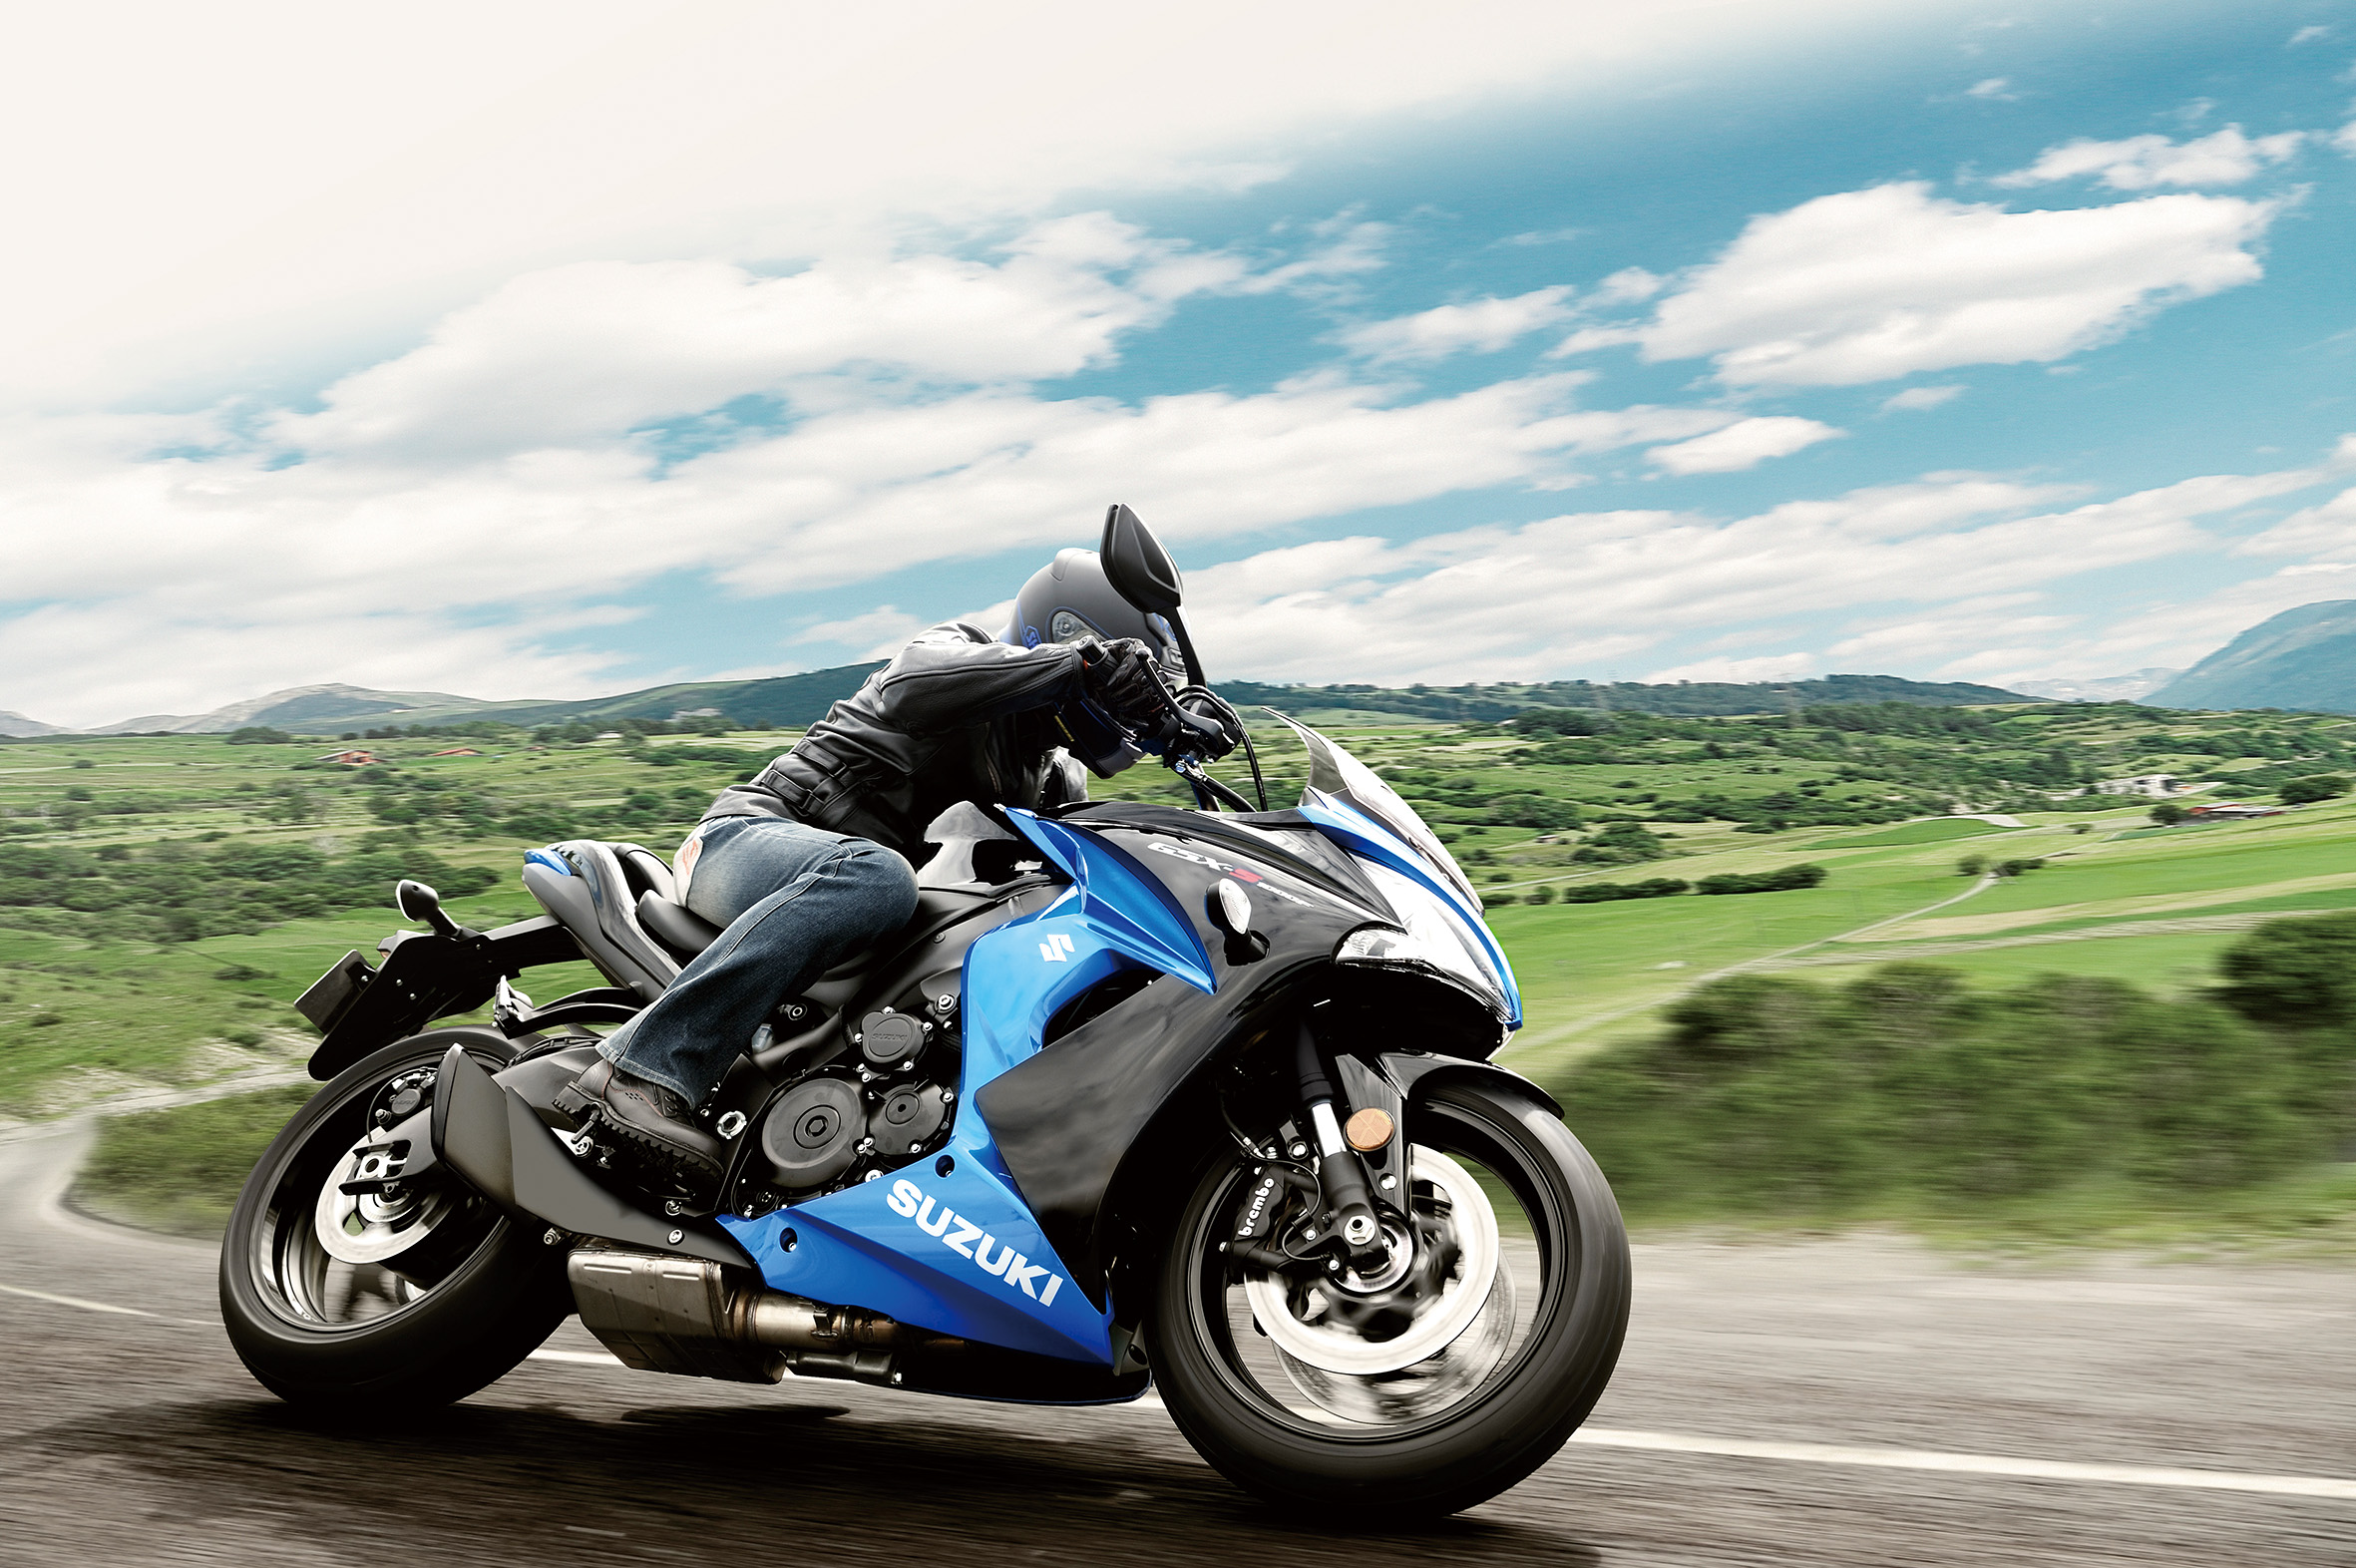 The Best Motorcycles for Bad Backs